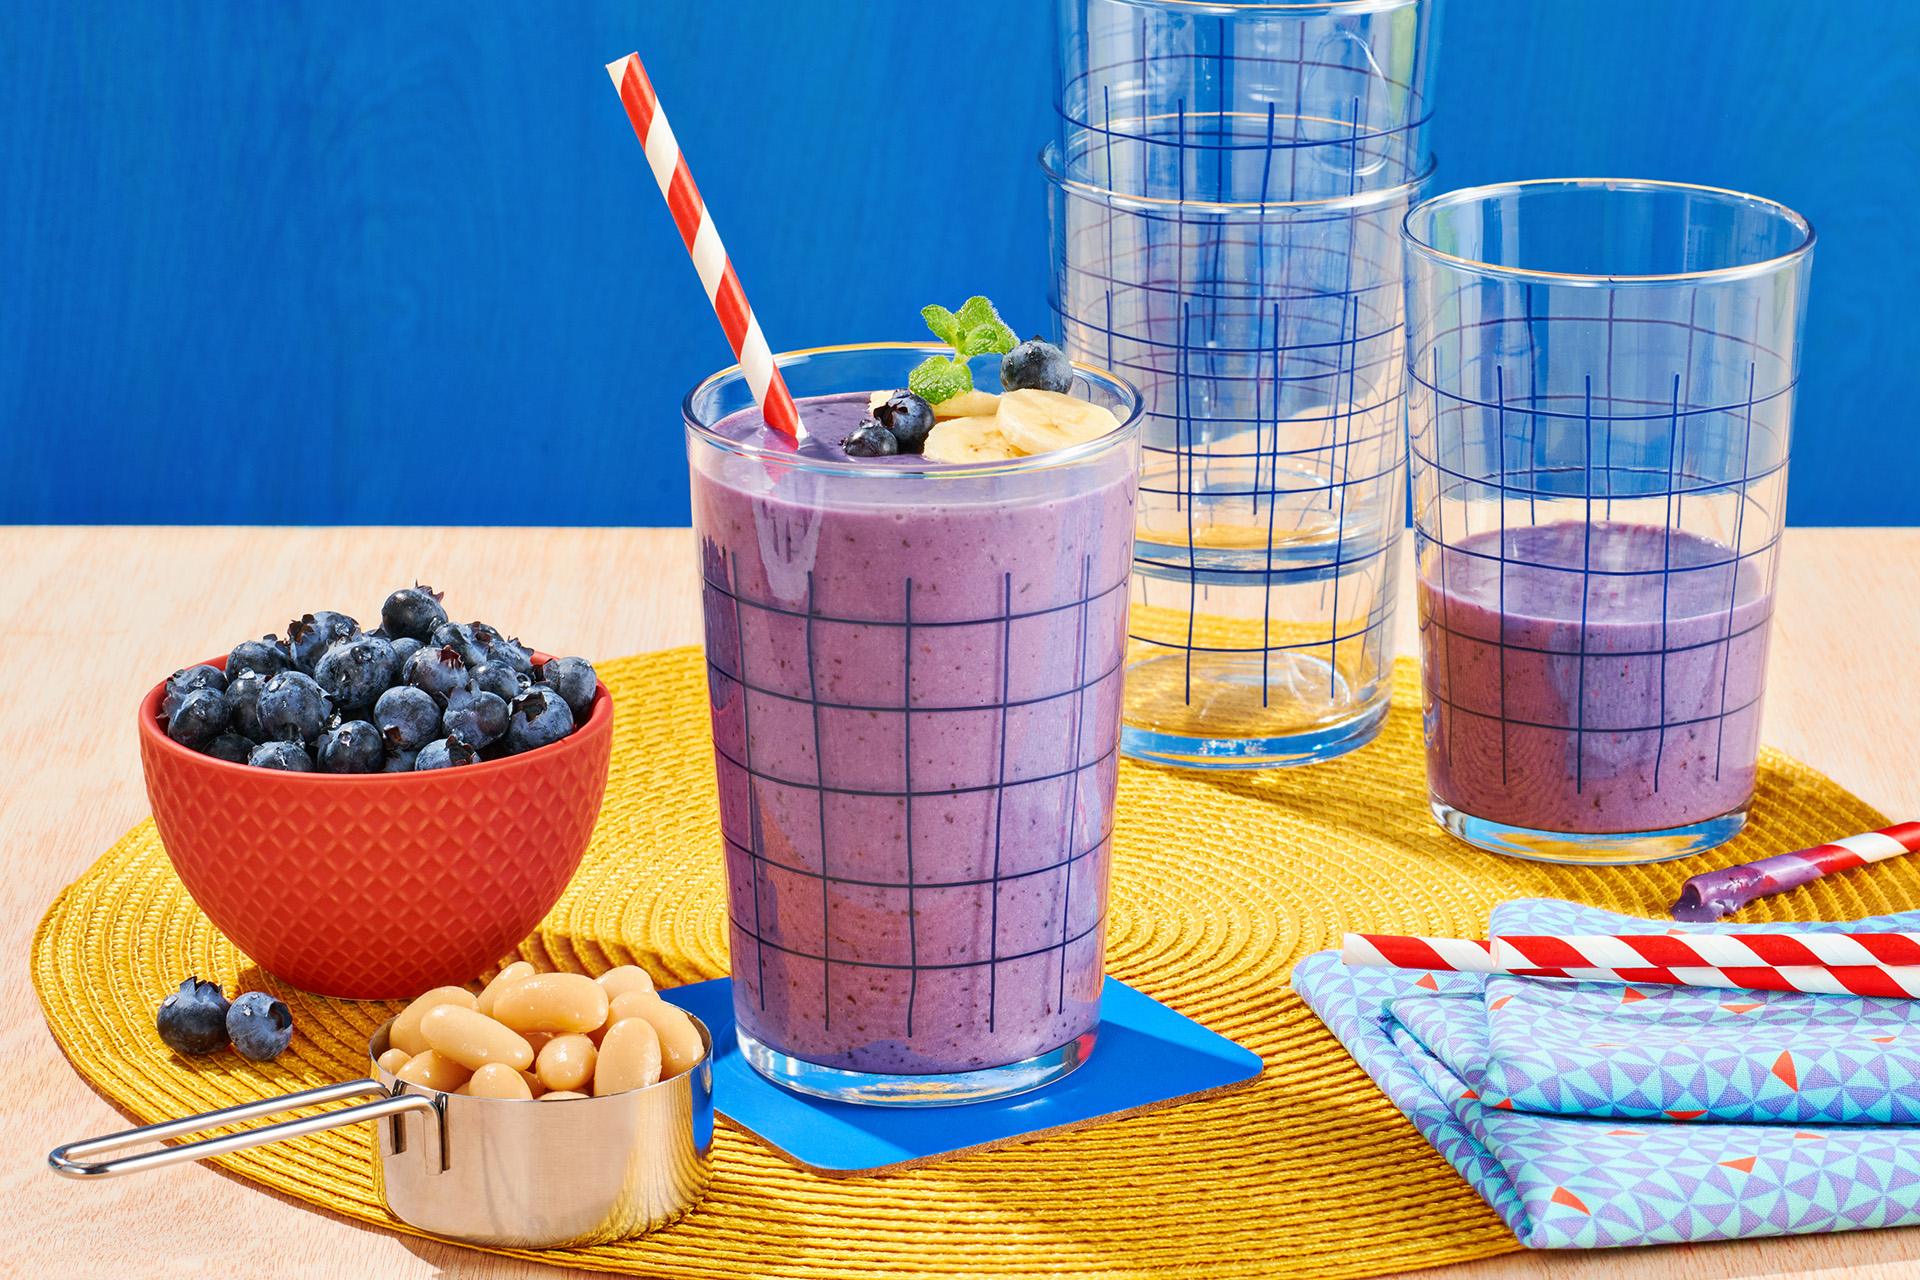 Banana blueberry and bean smoothie with striped straw next to a red bowl filled with blueberries and a silver measuring cup filled with white beans